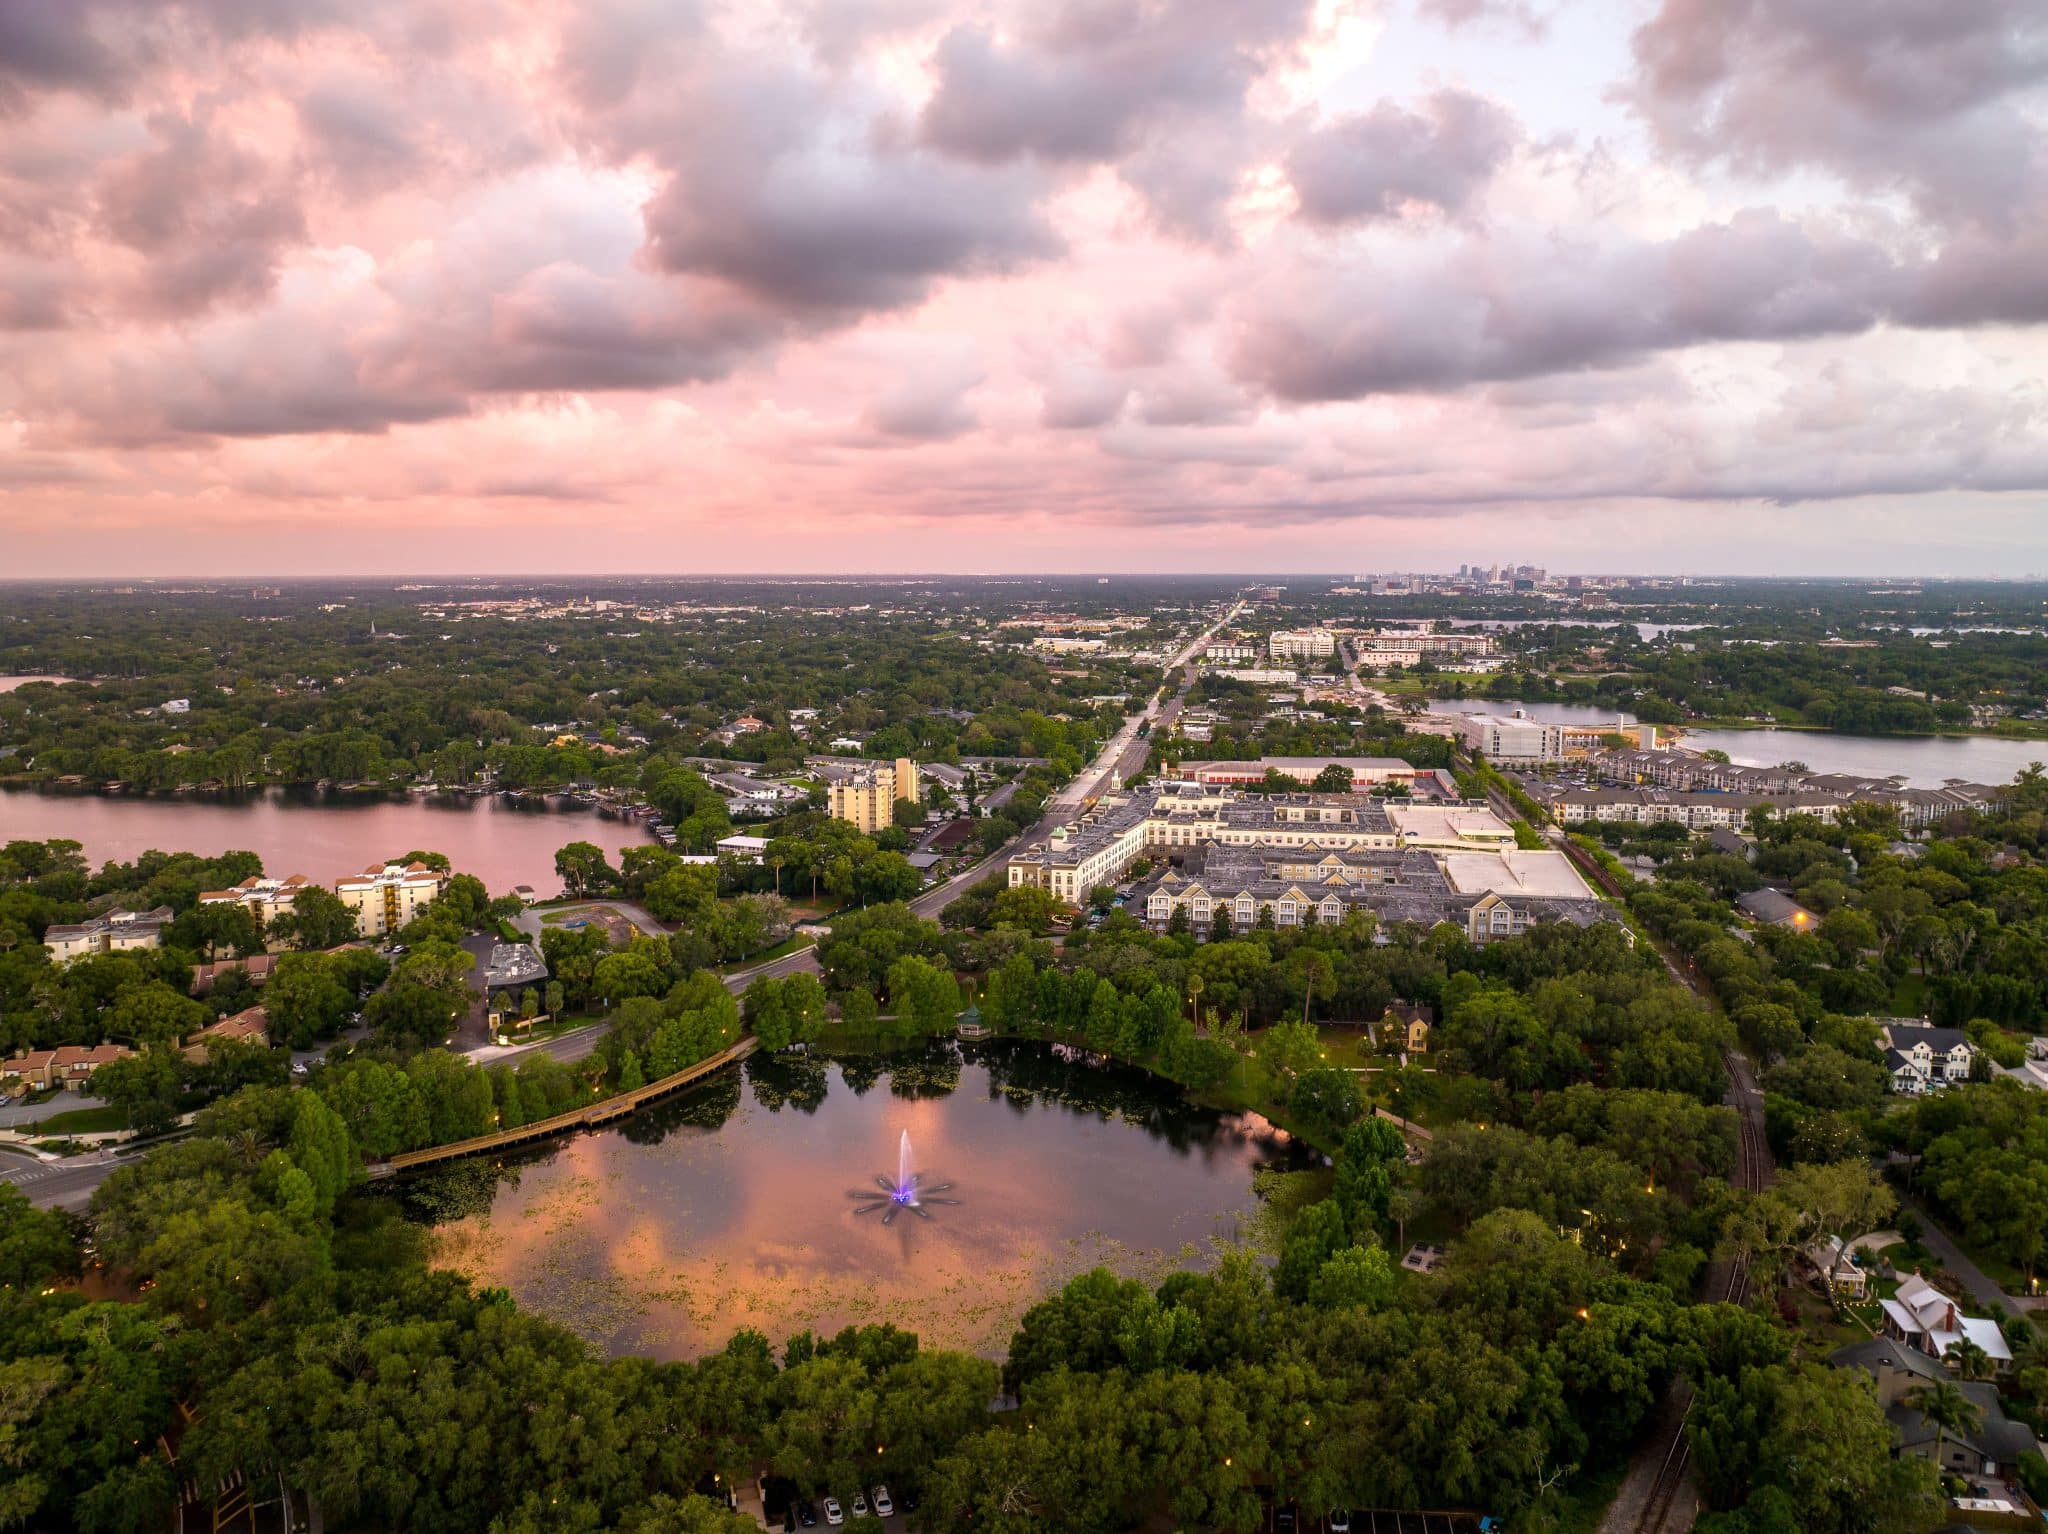 Aerial view of Maitland, FL and Lake Lily at dusk.